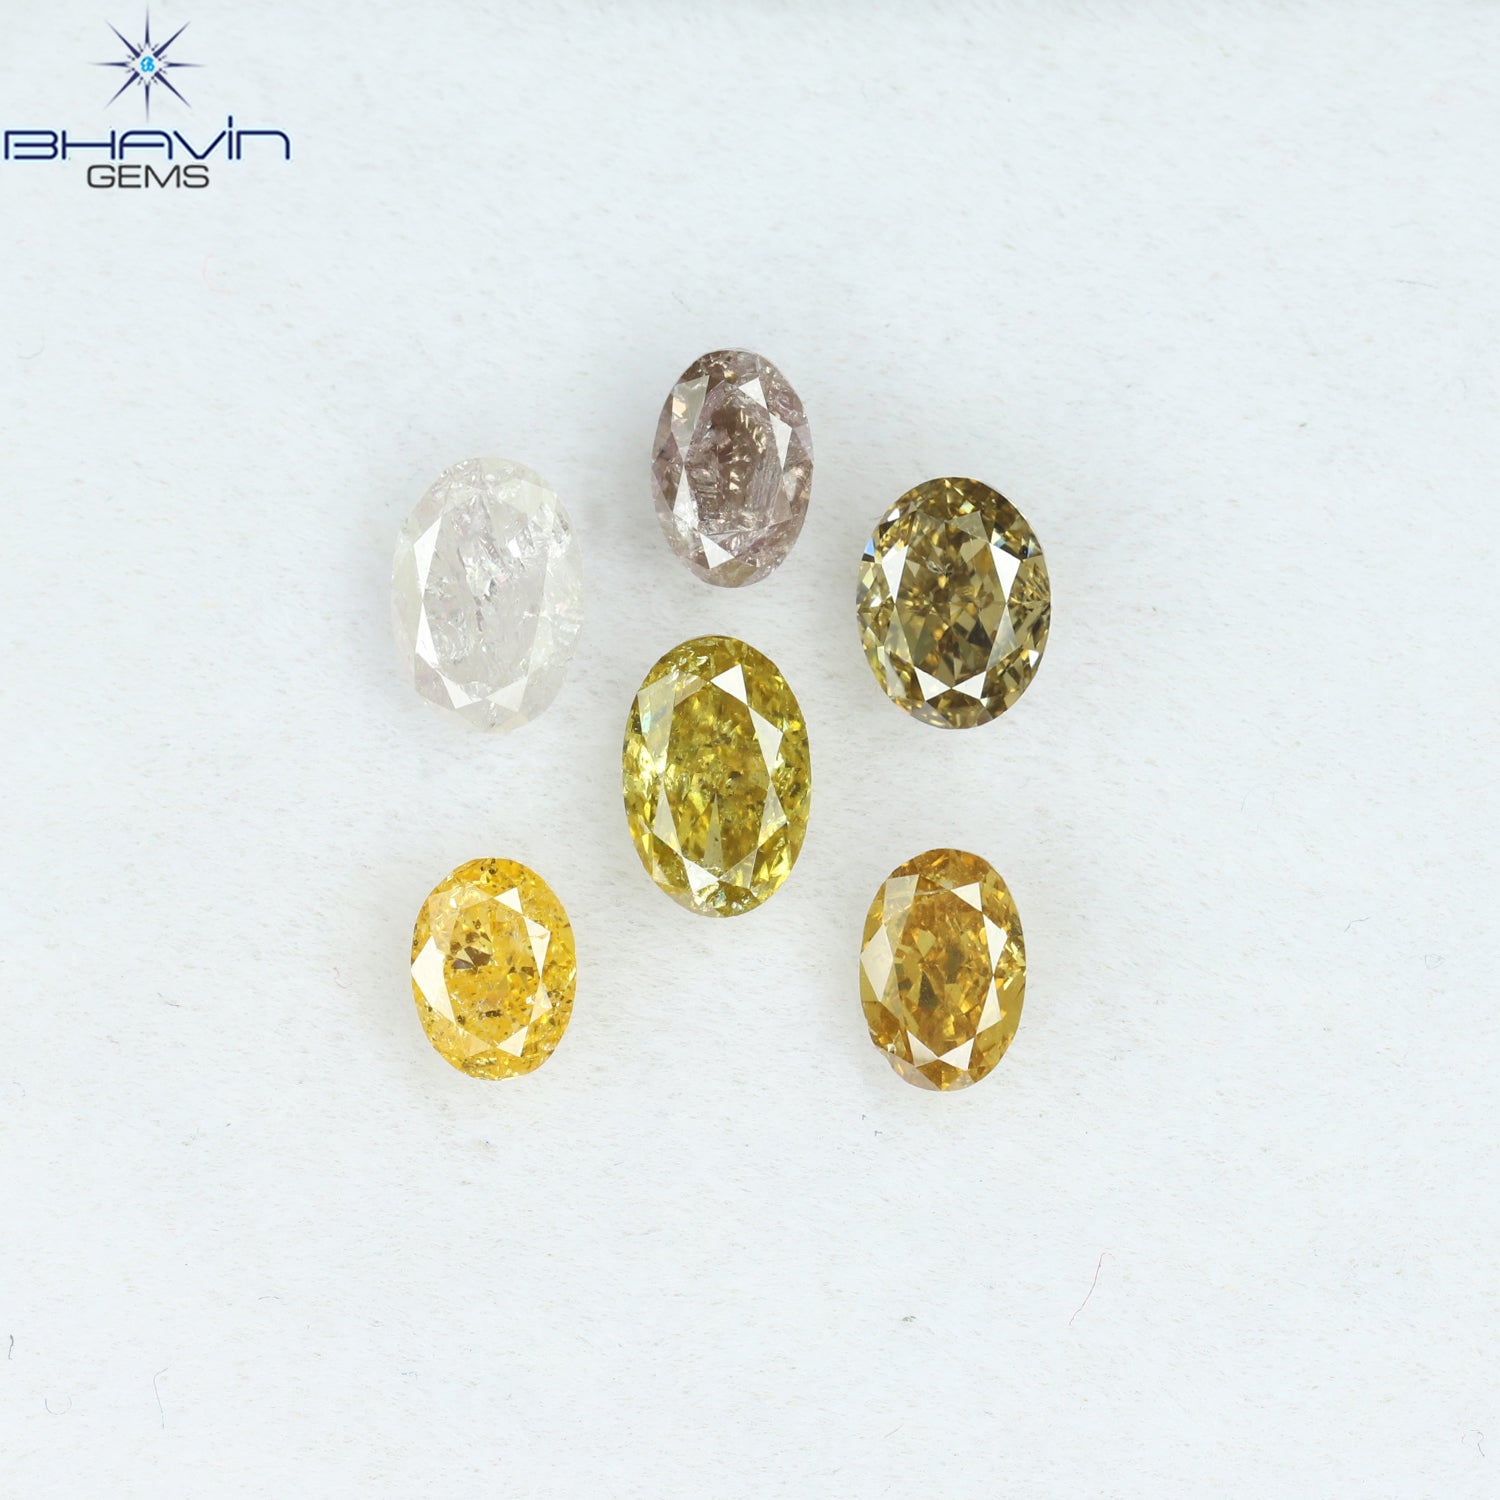 1.76 CT/6 Pcs Oval Shape Natural Diamond Mix Color SI1 Clarity (5.15 MM)